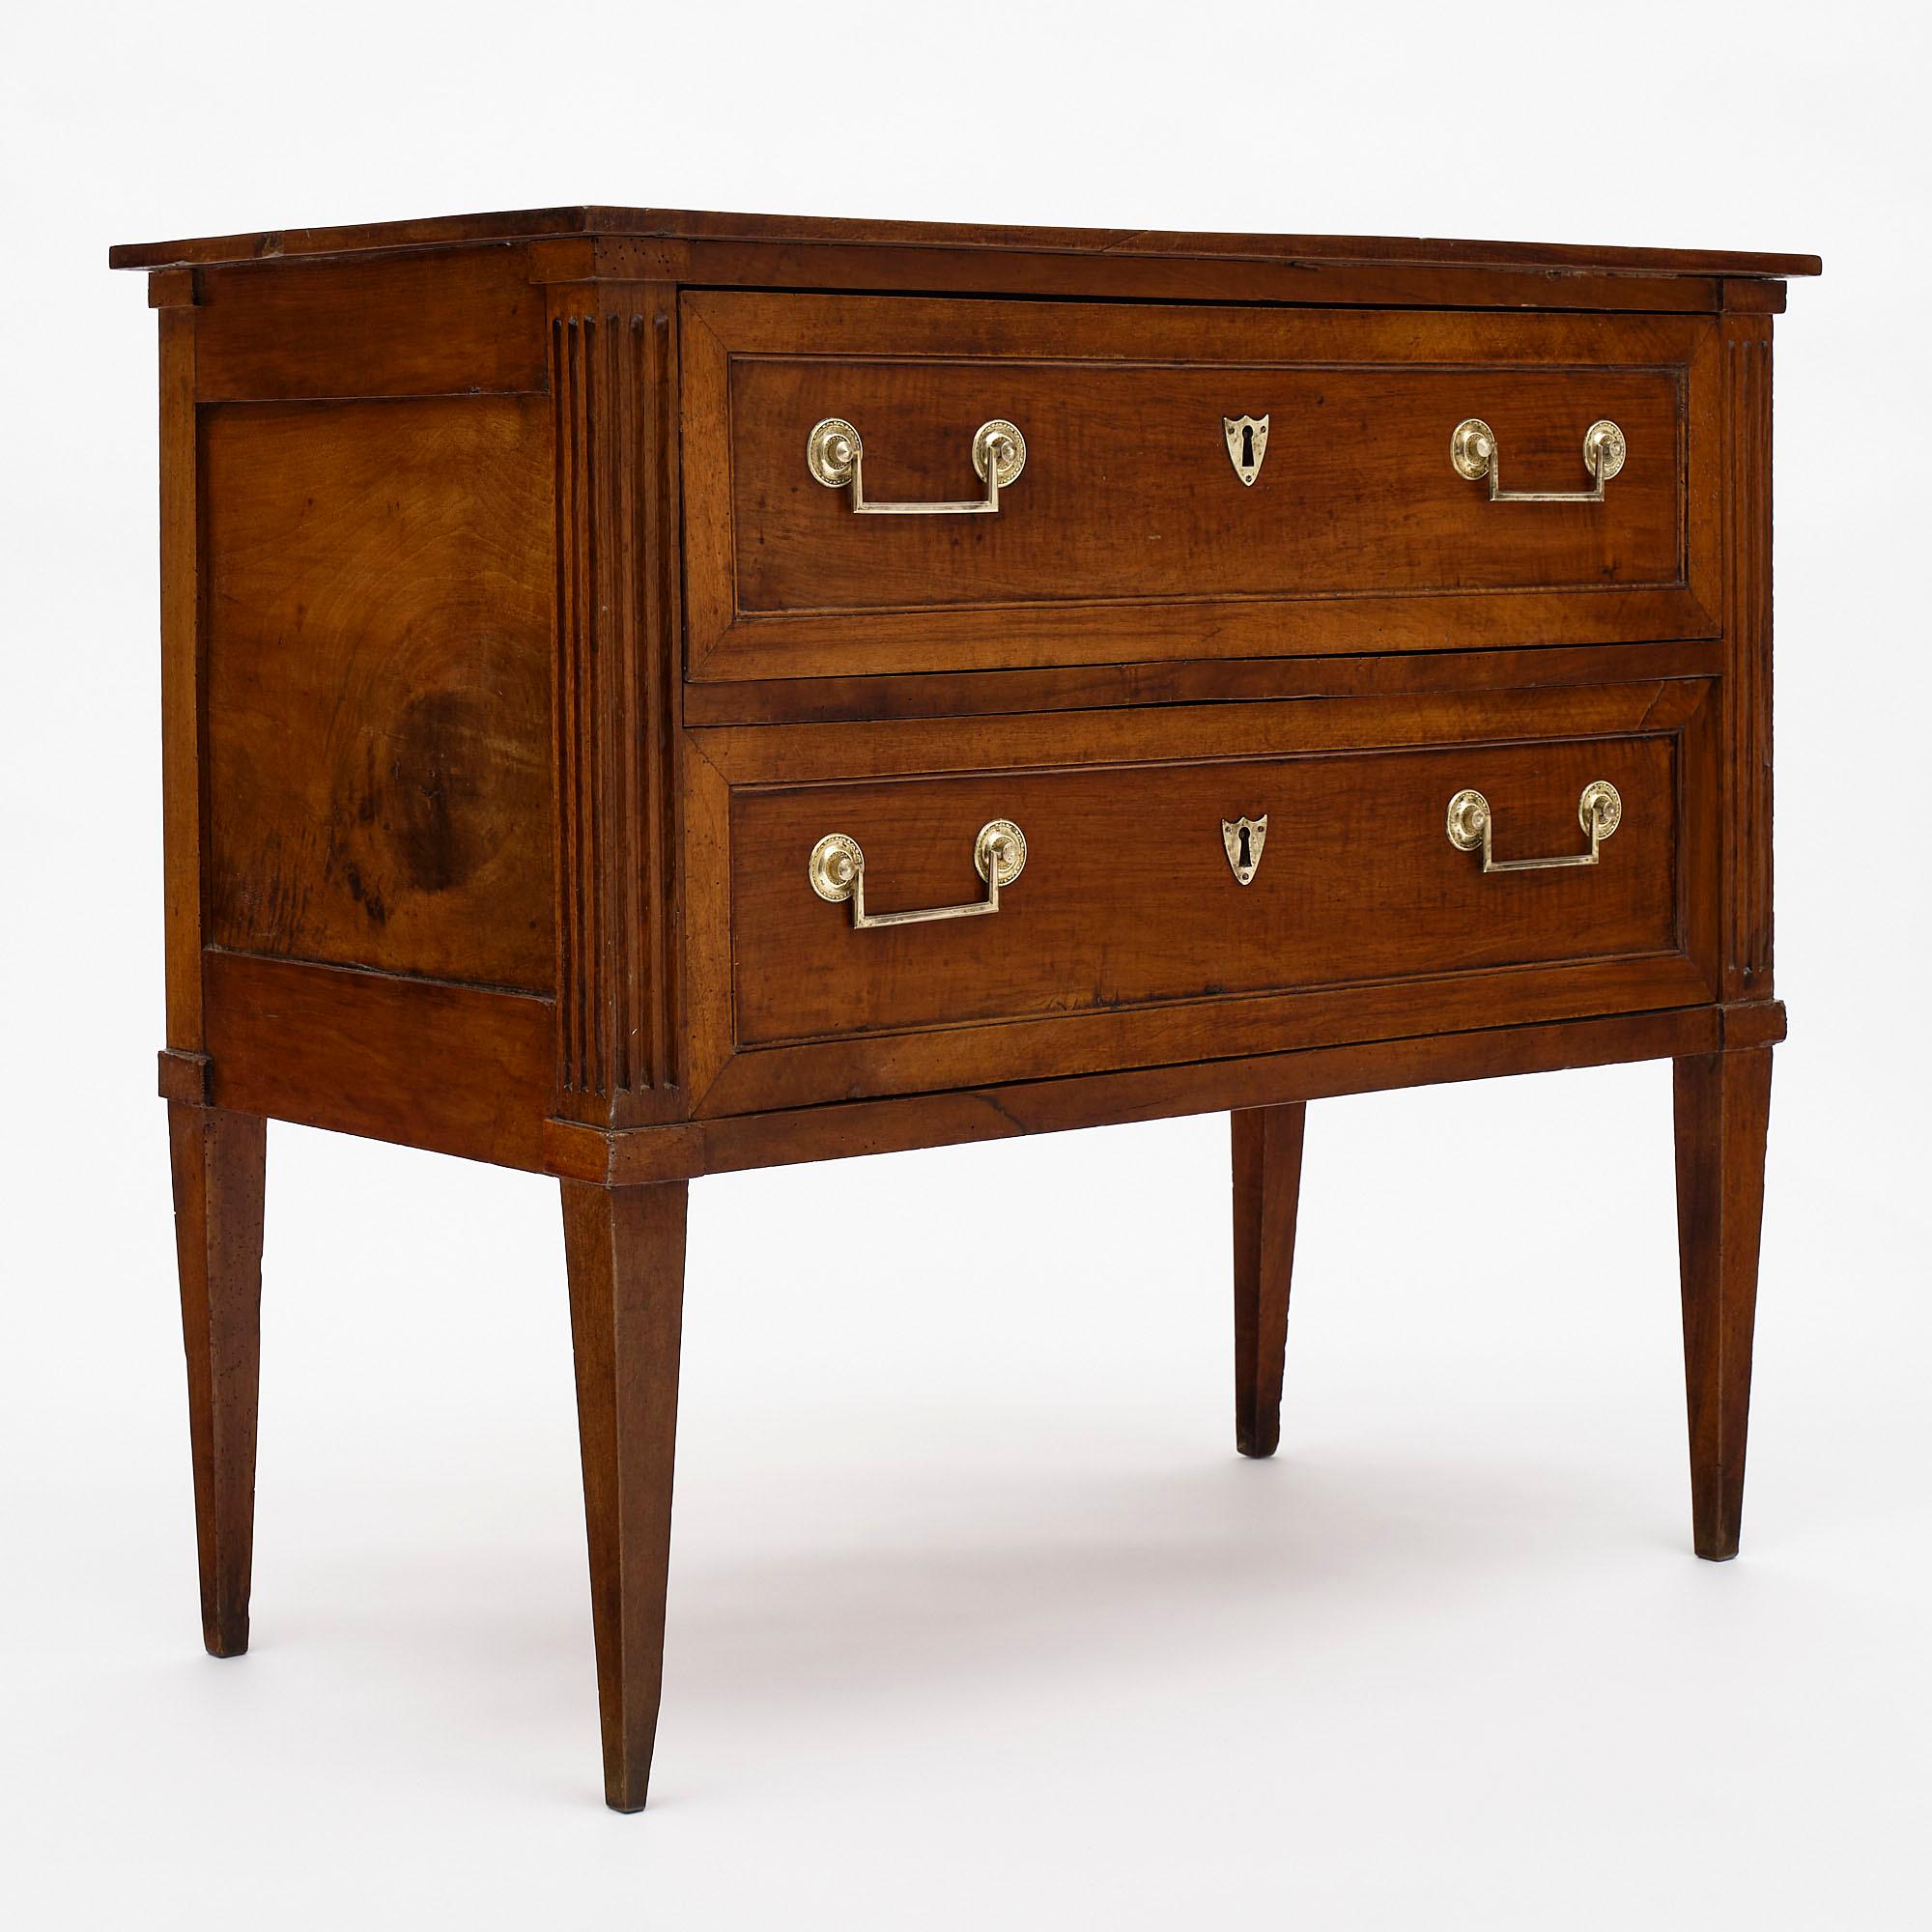 Chest of drawers or “commode sauteuse” from the French Directoire era made of solid walnut. We purchased this superb piece in the Rhône Valley. Two dovetailed drawers have oak as a secondary wood. The legs are square and tapered. We love the hand